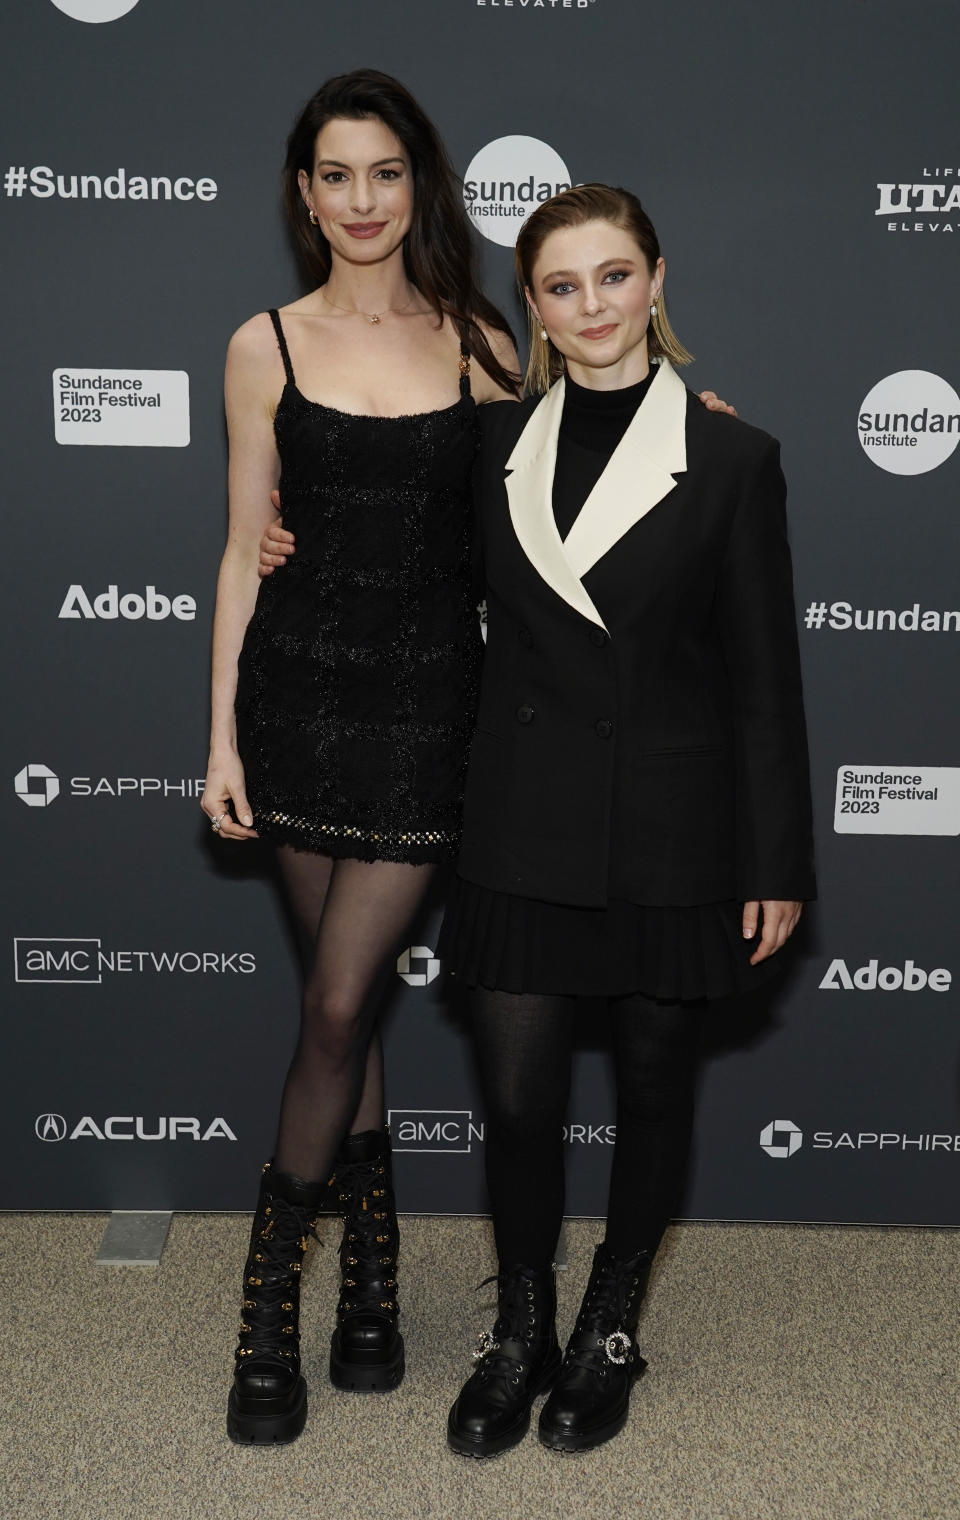 Anne Hathaway, left, and Thomasin McKenzie, cast members in "Eileen," pose together at the premiere of the film at the 2023 Sundance Film Festival, Saturday, Jan. 21, 2023, in Park City, Utah. (AP Photo/Chris Pizzello)